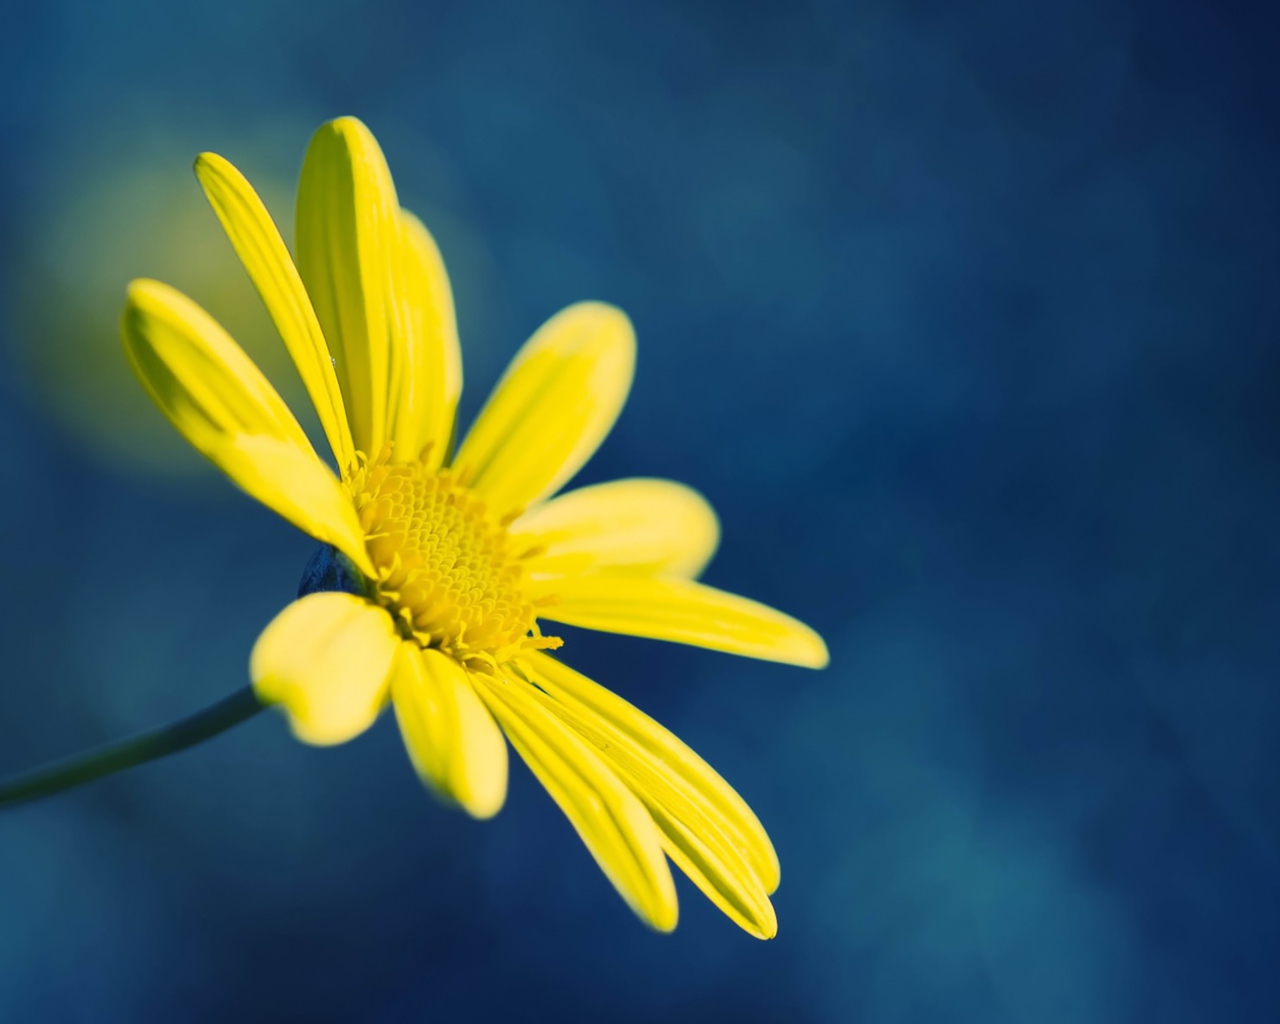 Yellow Flower On Blue Background wallpaper 1280x1024